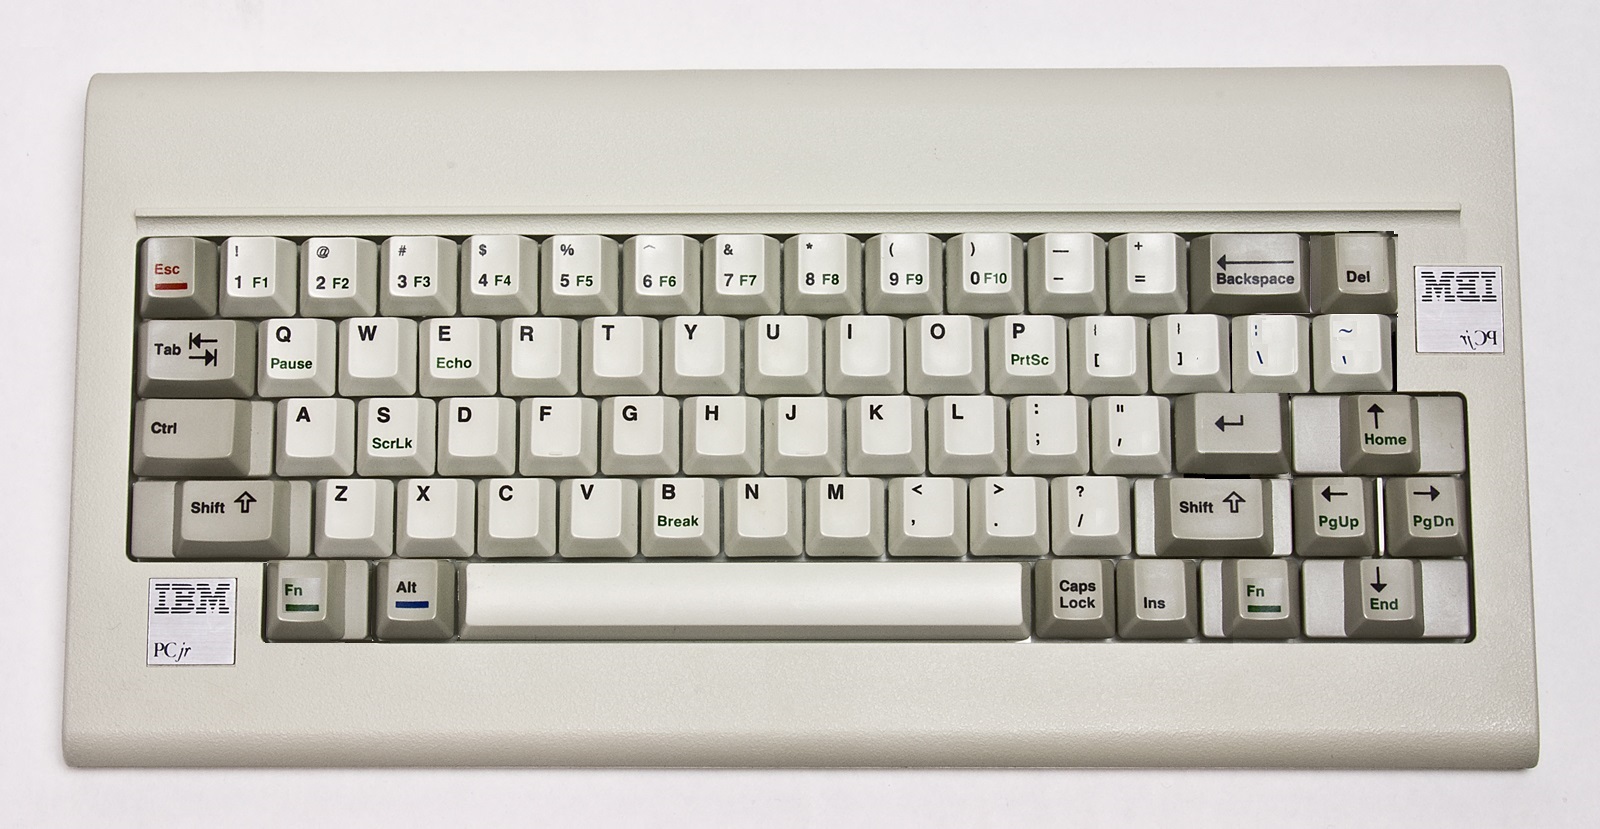 IBM PCJr keyboard - as I think it could have been.